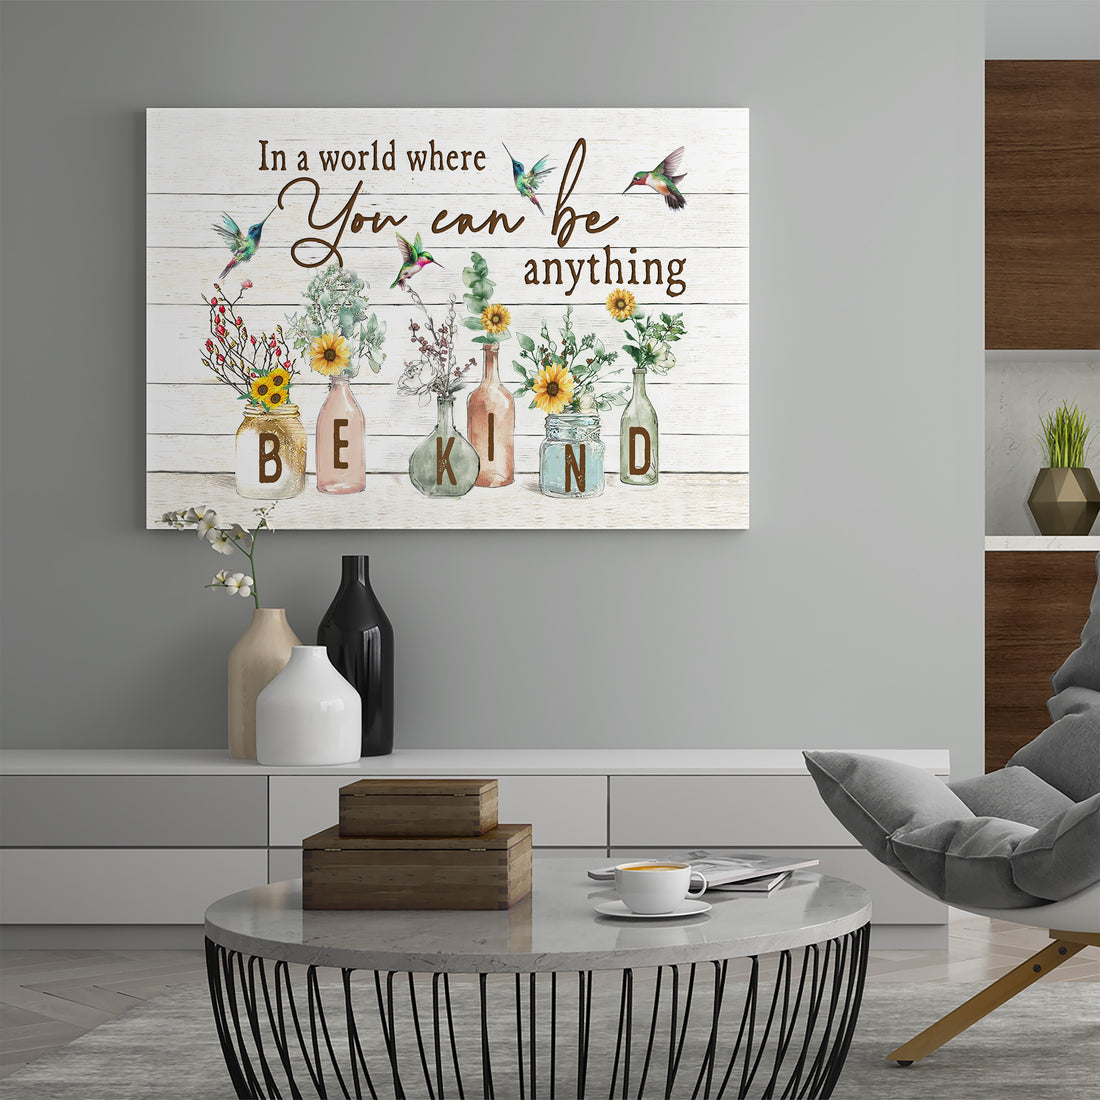 "Poster Wall, In A World Where You Can Be Anything Be Kind Poster, Flower Garden, Hummingbird Images, Quotes About Life, Living Room Decorations         "